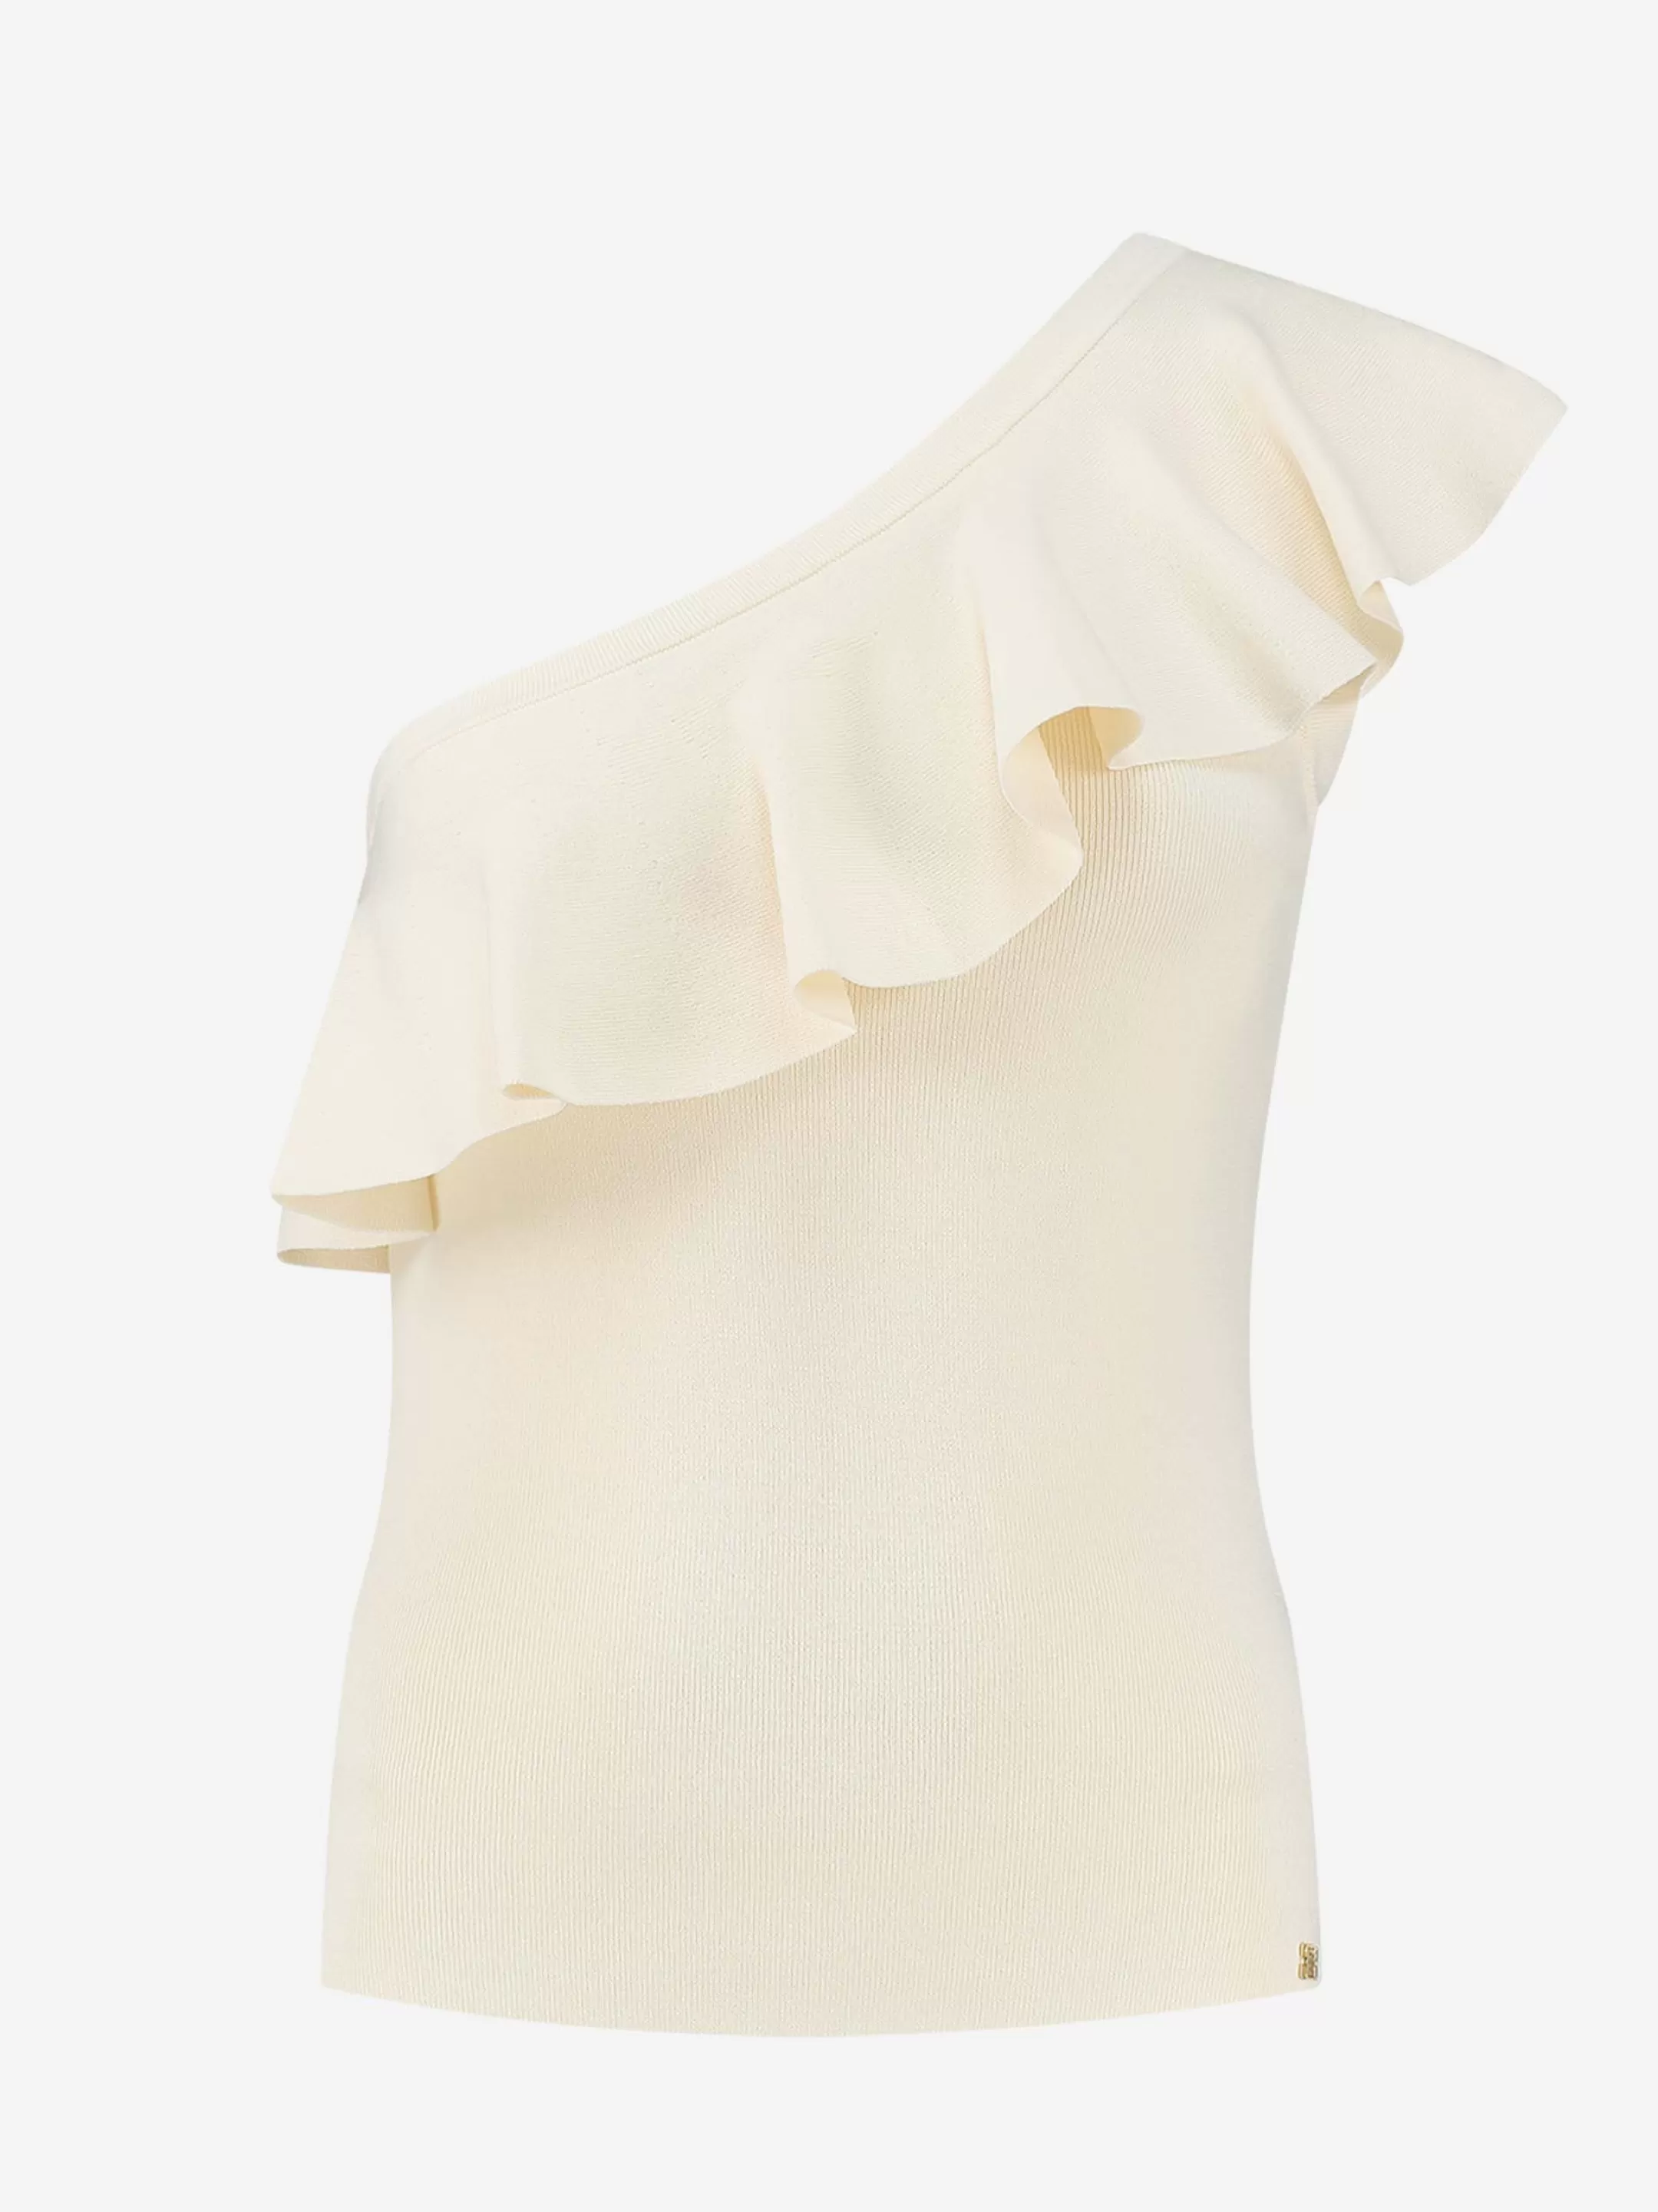 Best Sale FITTED ONE-SCHOULDER TOP MET RUCHES Tops | Selected by Kate Moss